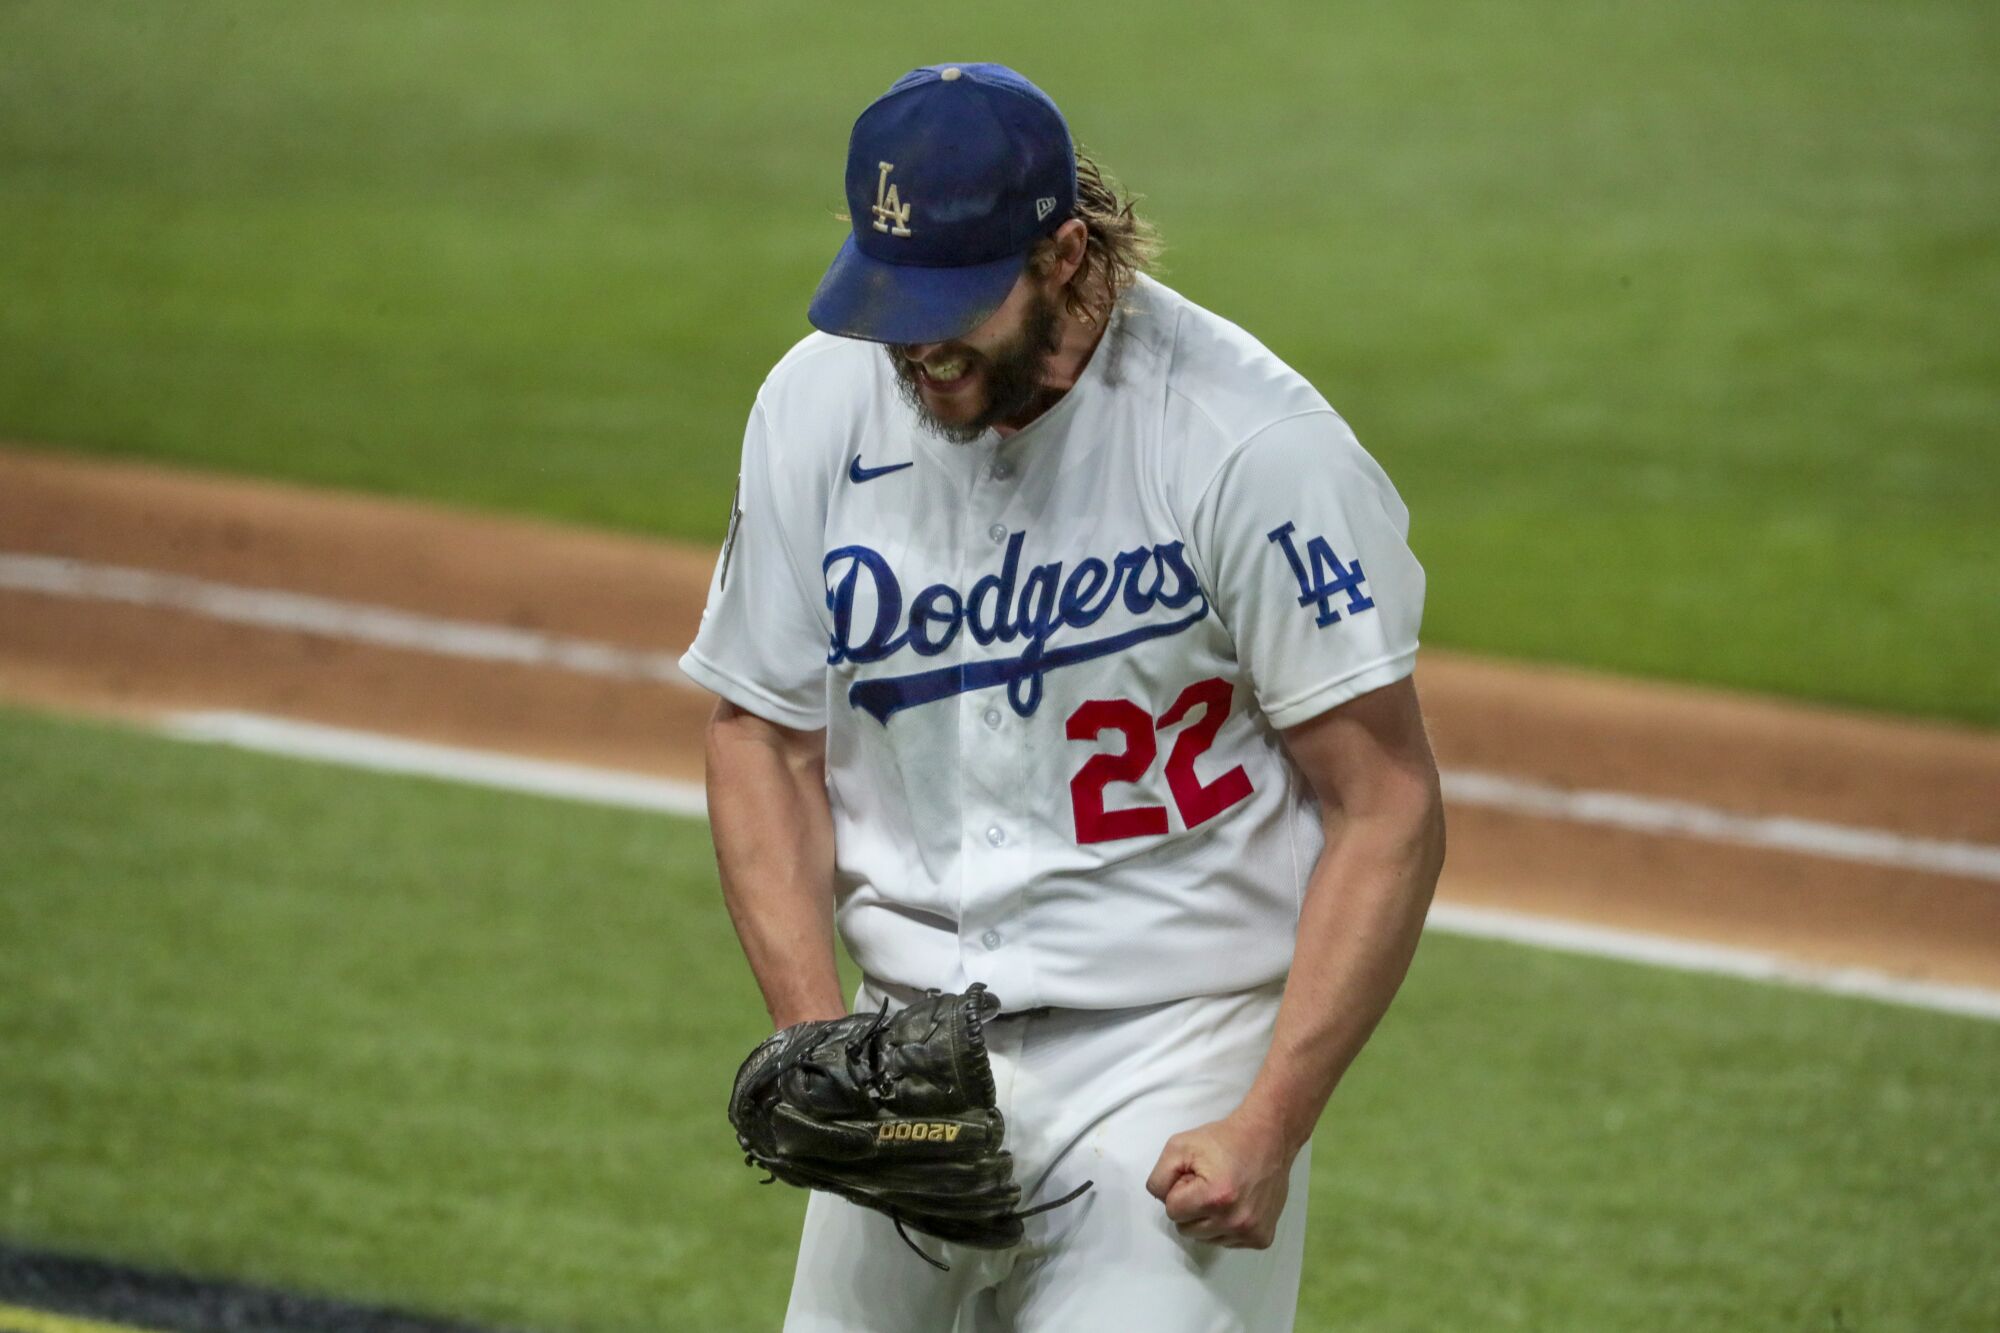 Dodgers starting pitcher Clayton Kershaw yells out in frustration as he heads to the dugout.